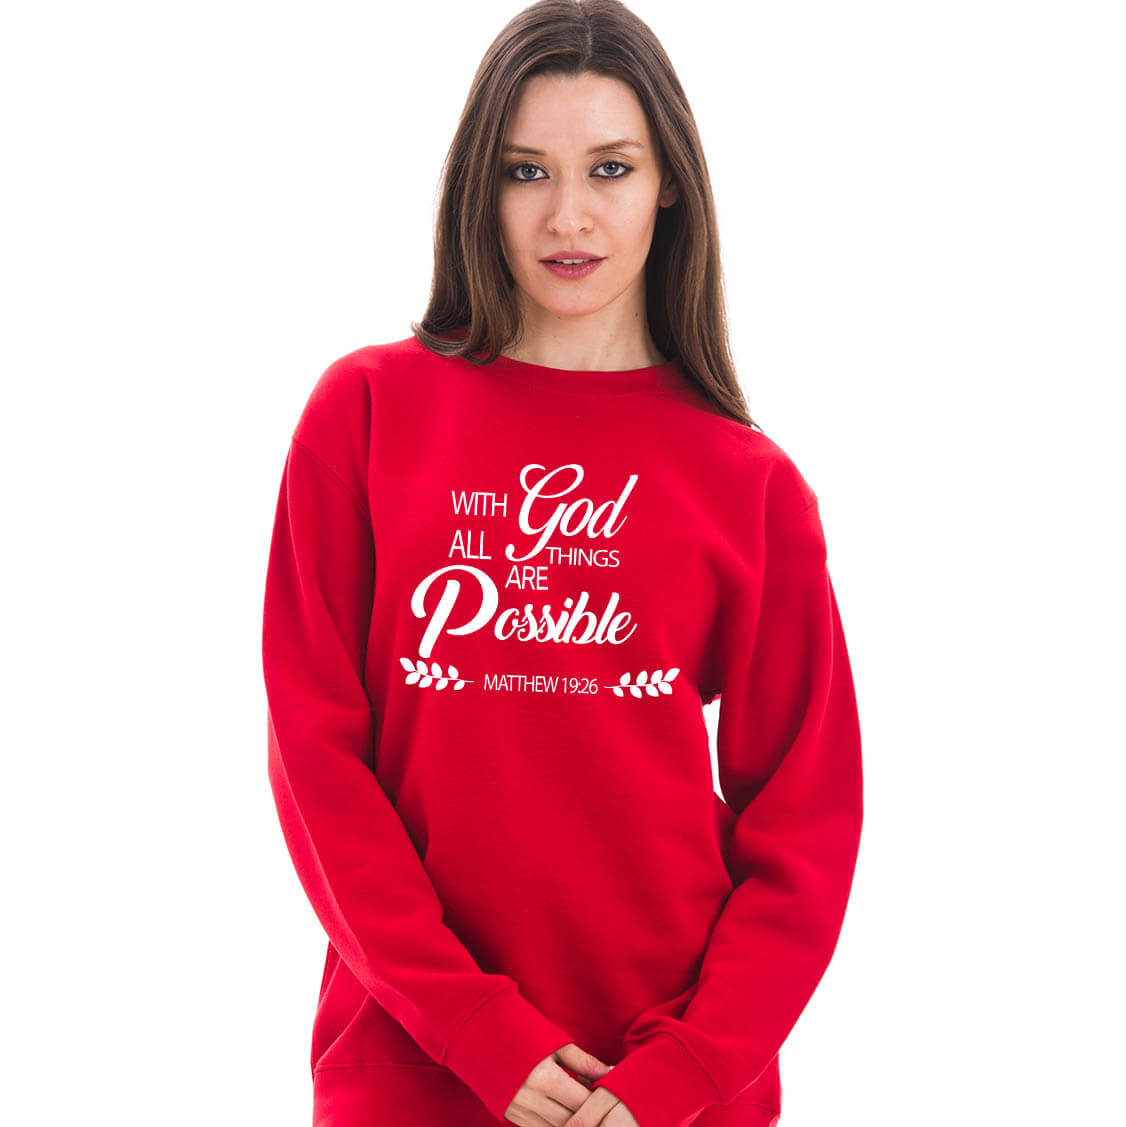 All Things Are Possible Crewneck Unisex Sweatshirt